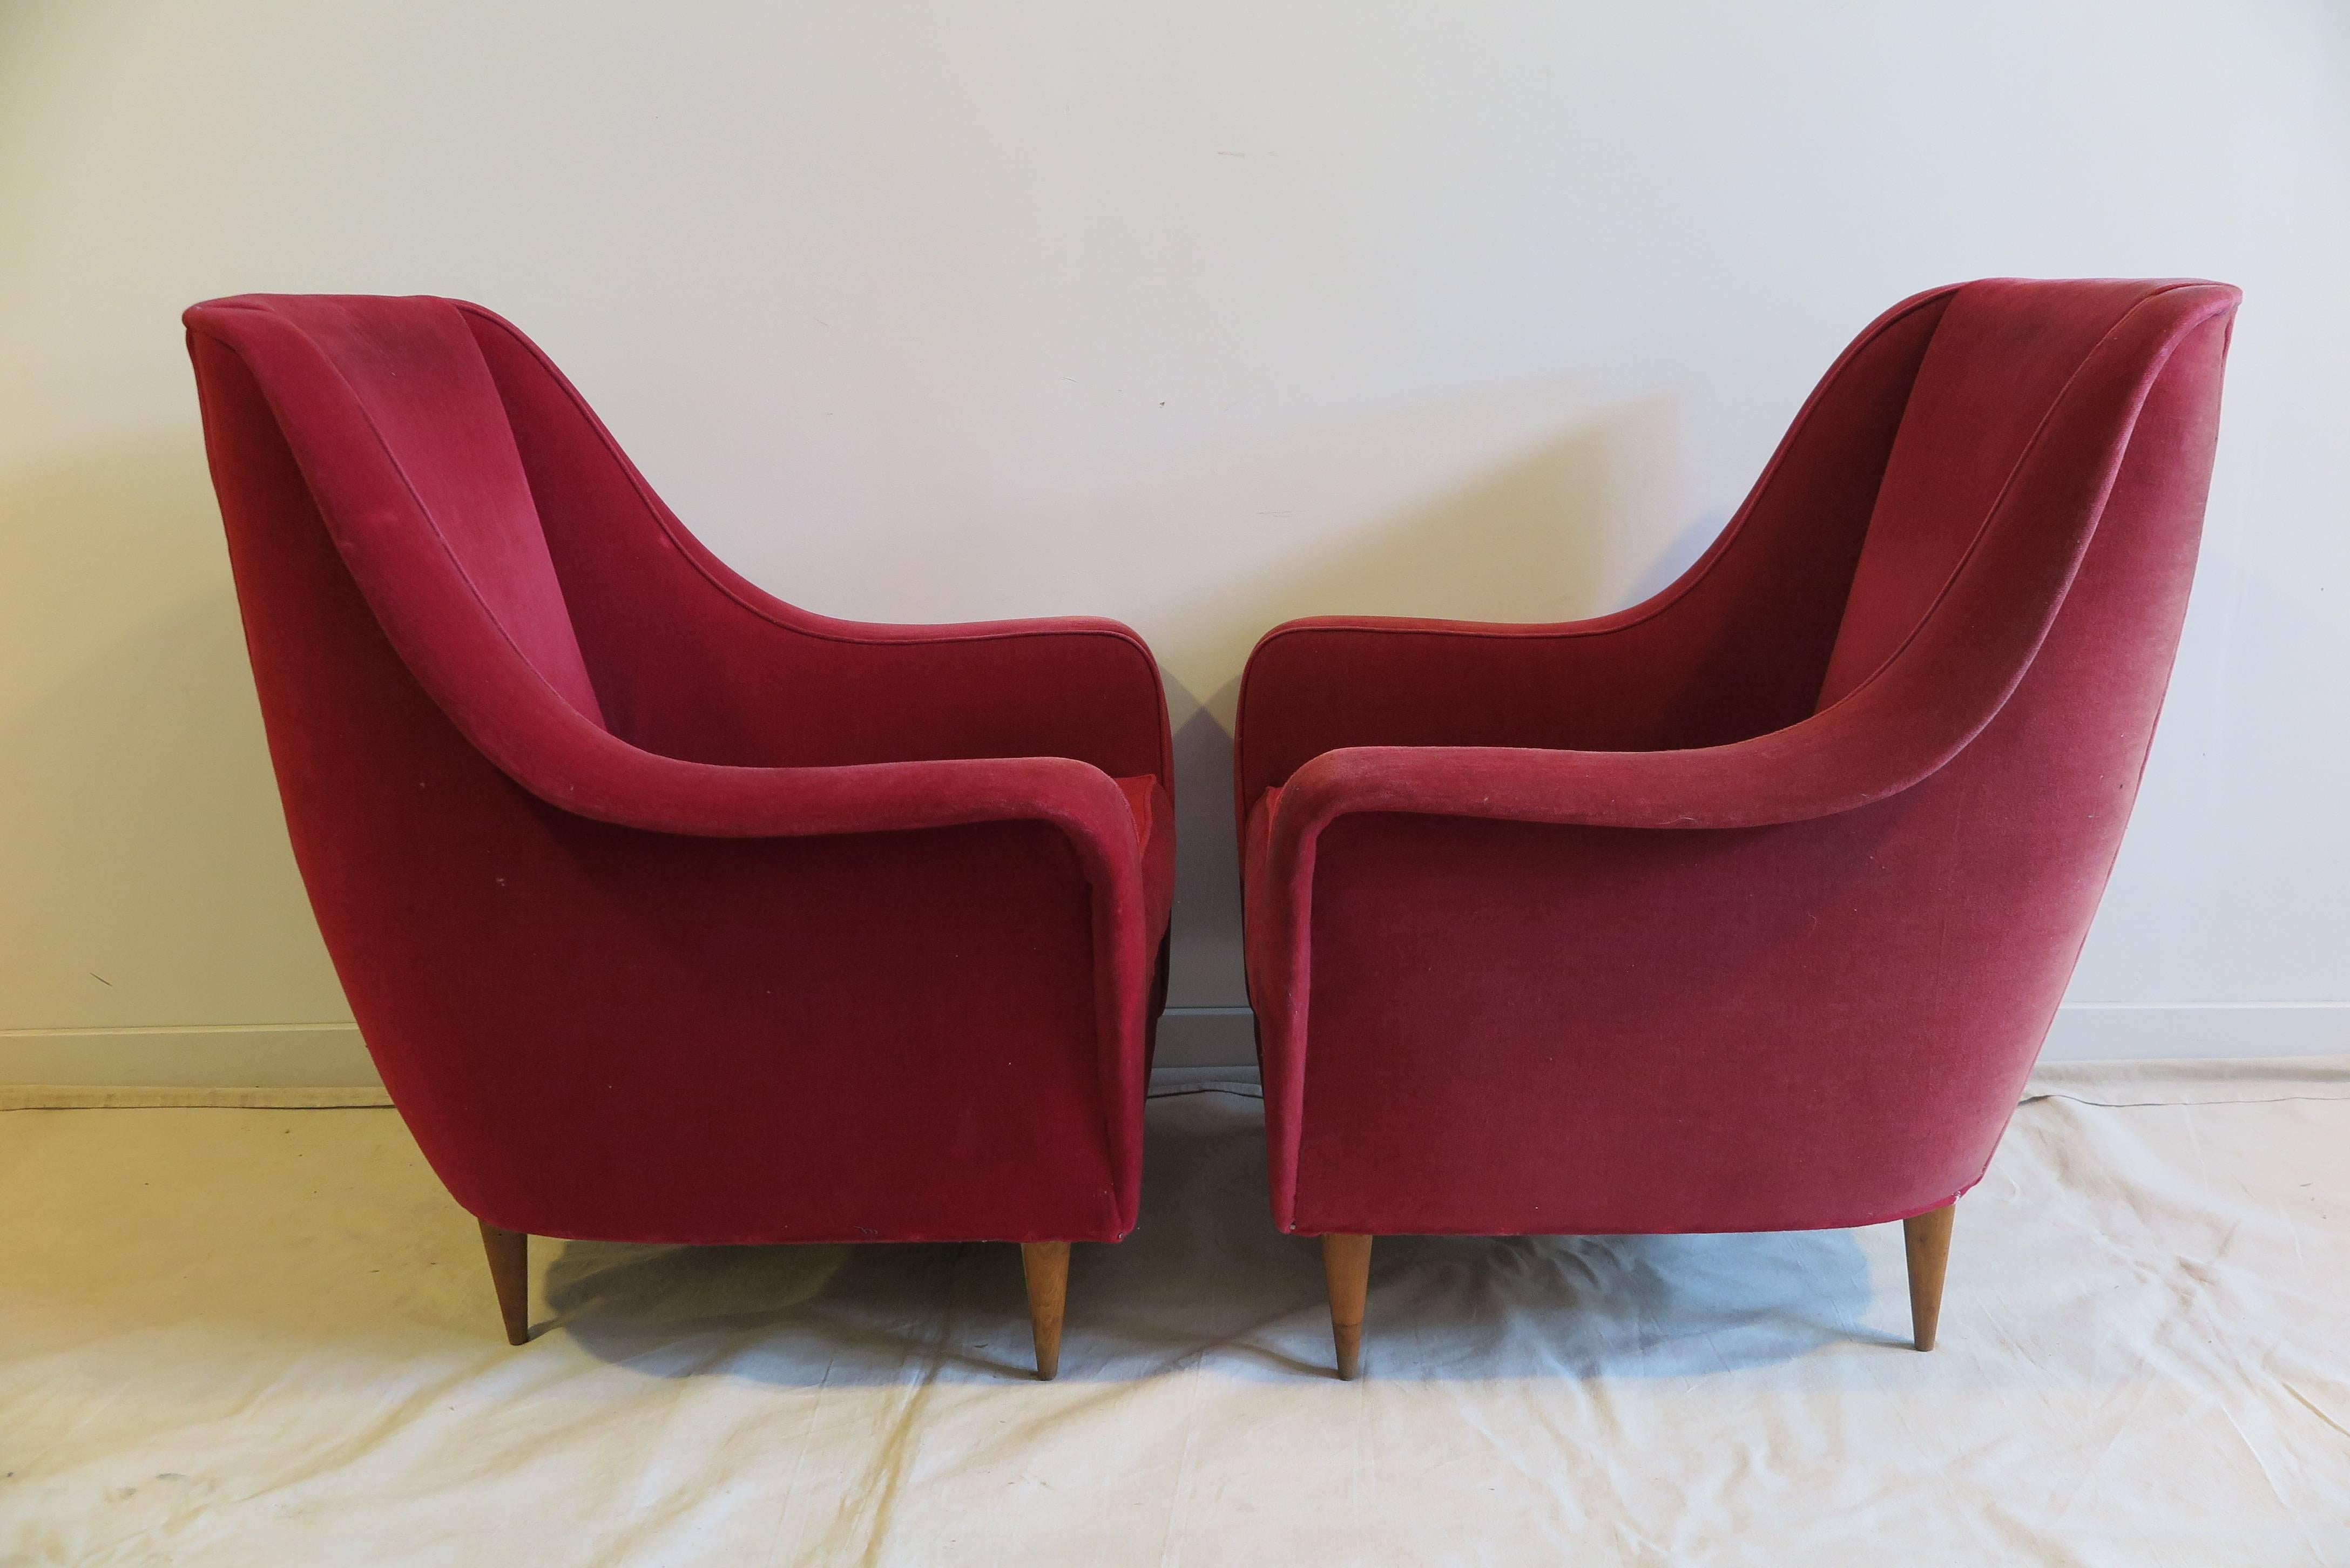 Pair of Italian Mid-Century club chairs lounge chairs in the style of Ico Parisi. Exceptionally sculpted on minimal wooden legs. Extremely comfortable. Upholstery is faded, new upholstery recommended.